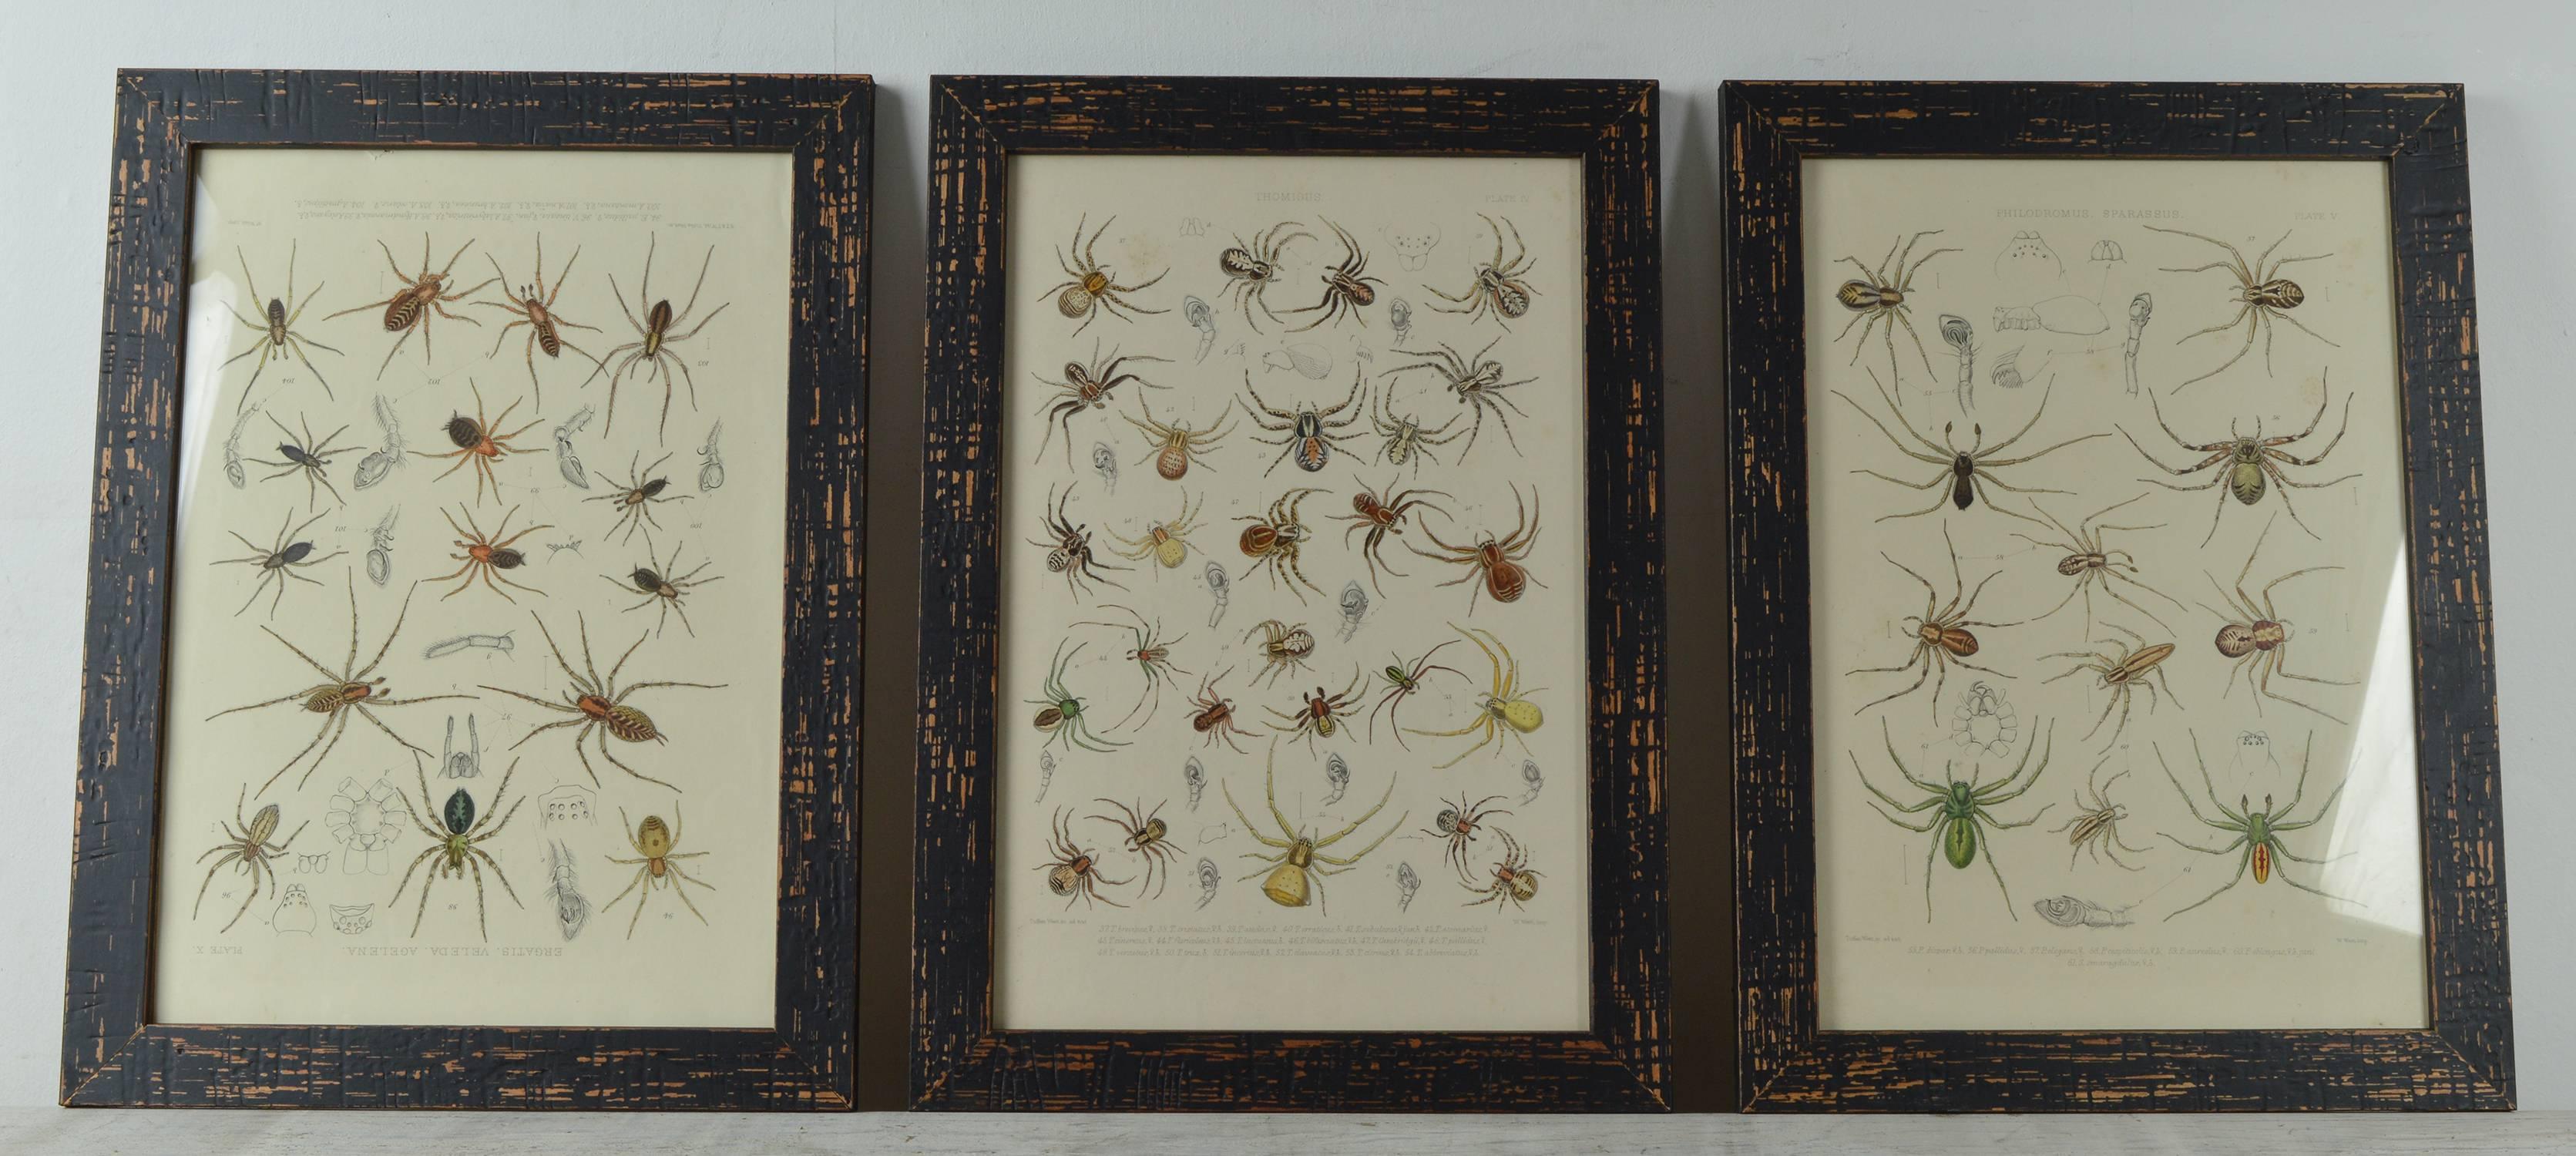 Wonderful set of 12 spider prints.

Steel Engravings by Tuffen West with original color.

Published 1861.

Presented in slightly distressed black painted frames.